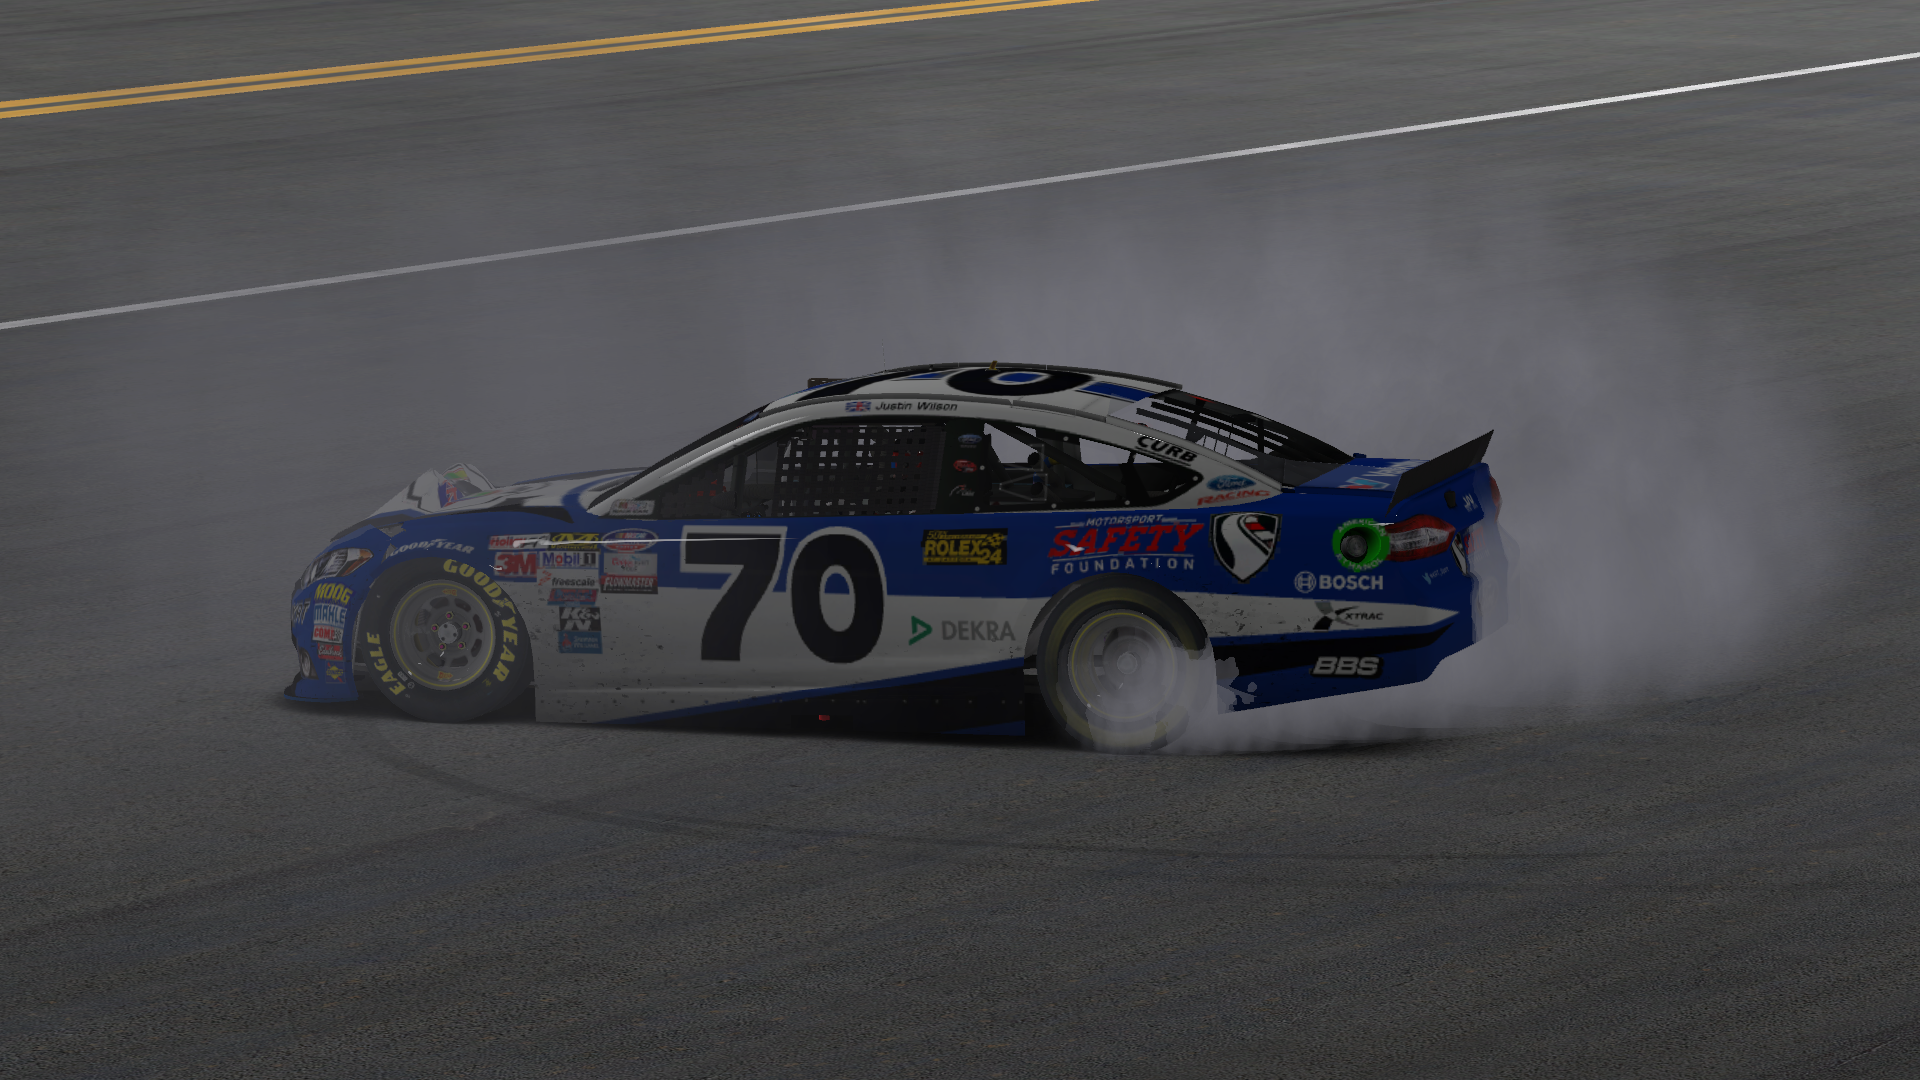 Damaged but still victorious at Daytona driving a tribute paint scheme to Justin Wilson.